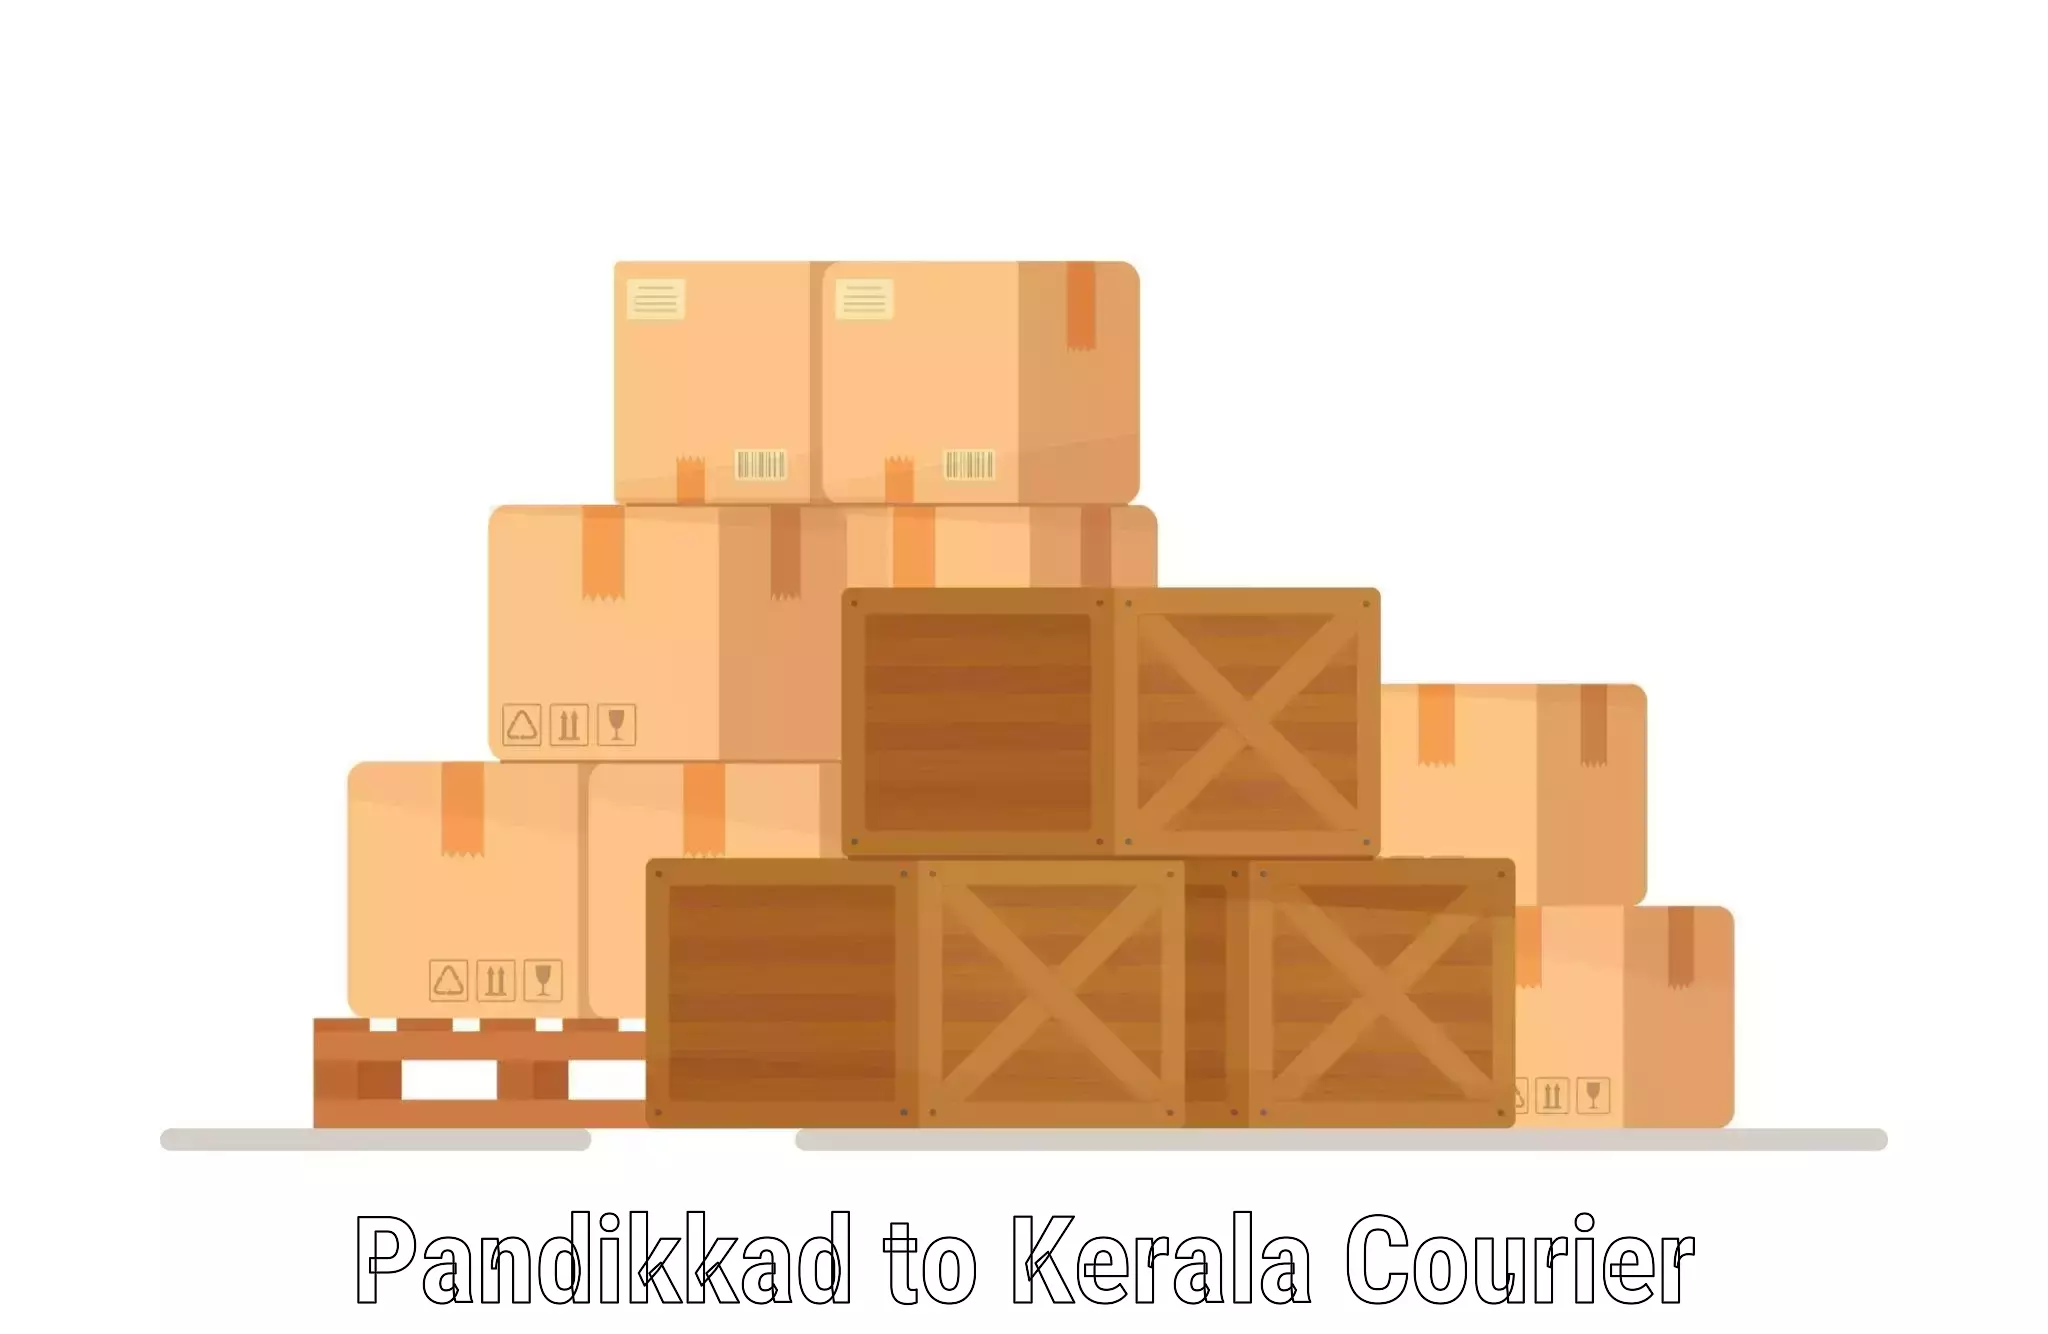 Medical delivery services Pandikkad to Cochin Port Kochi